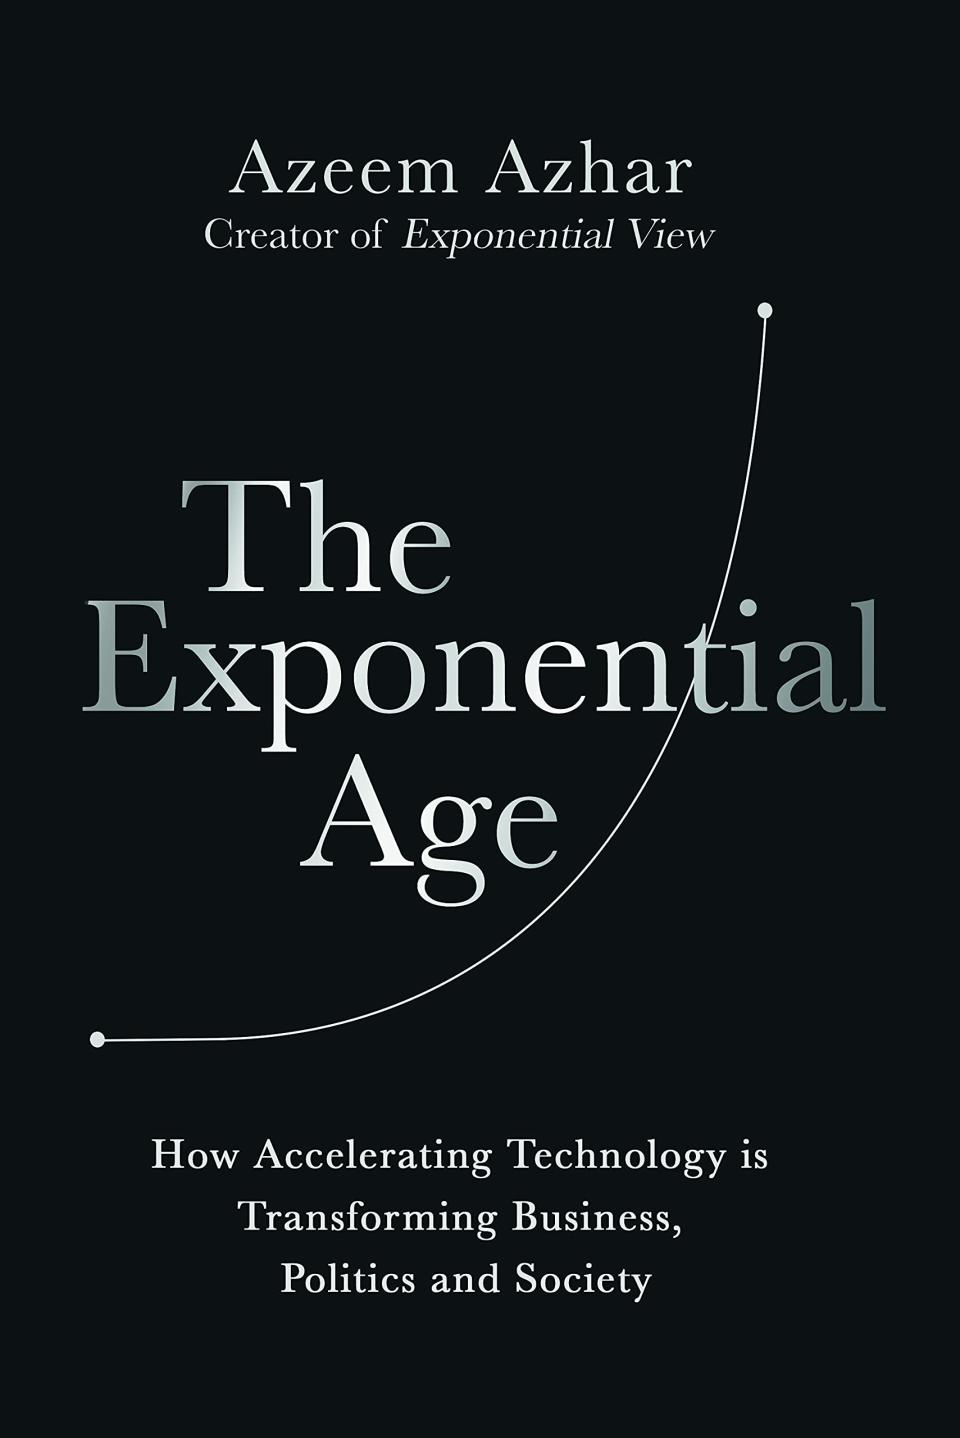 The Exponential Age by Azeem Azhar